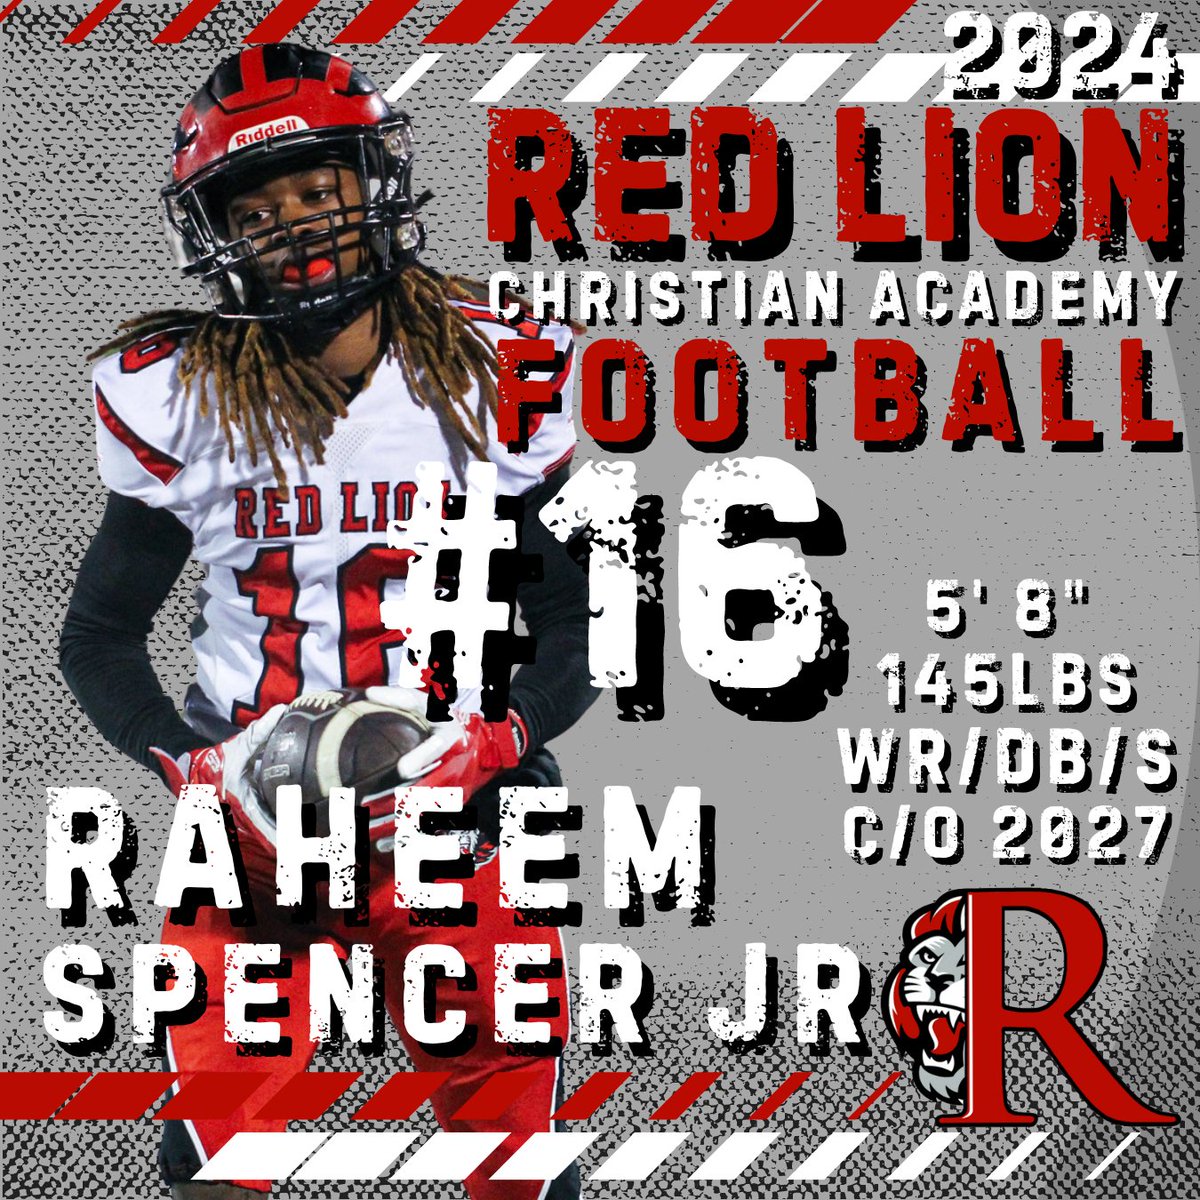 Raheem Spencer Jr., an upcoming sophomore at Red Lion Christian Academy, is an exceptional student athlete who has achieved a 4.7 cumulative GPA as an honors student his first year in RLCA. This is an accomplishment Raheem is most proud of. Rah Jr, class of 2027, has not only…